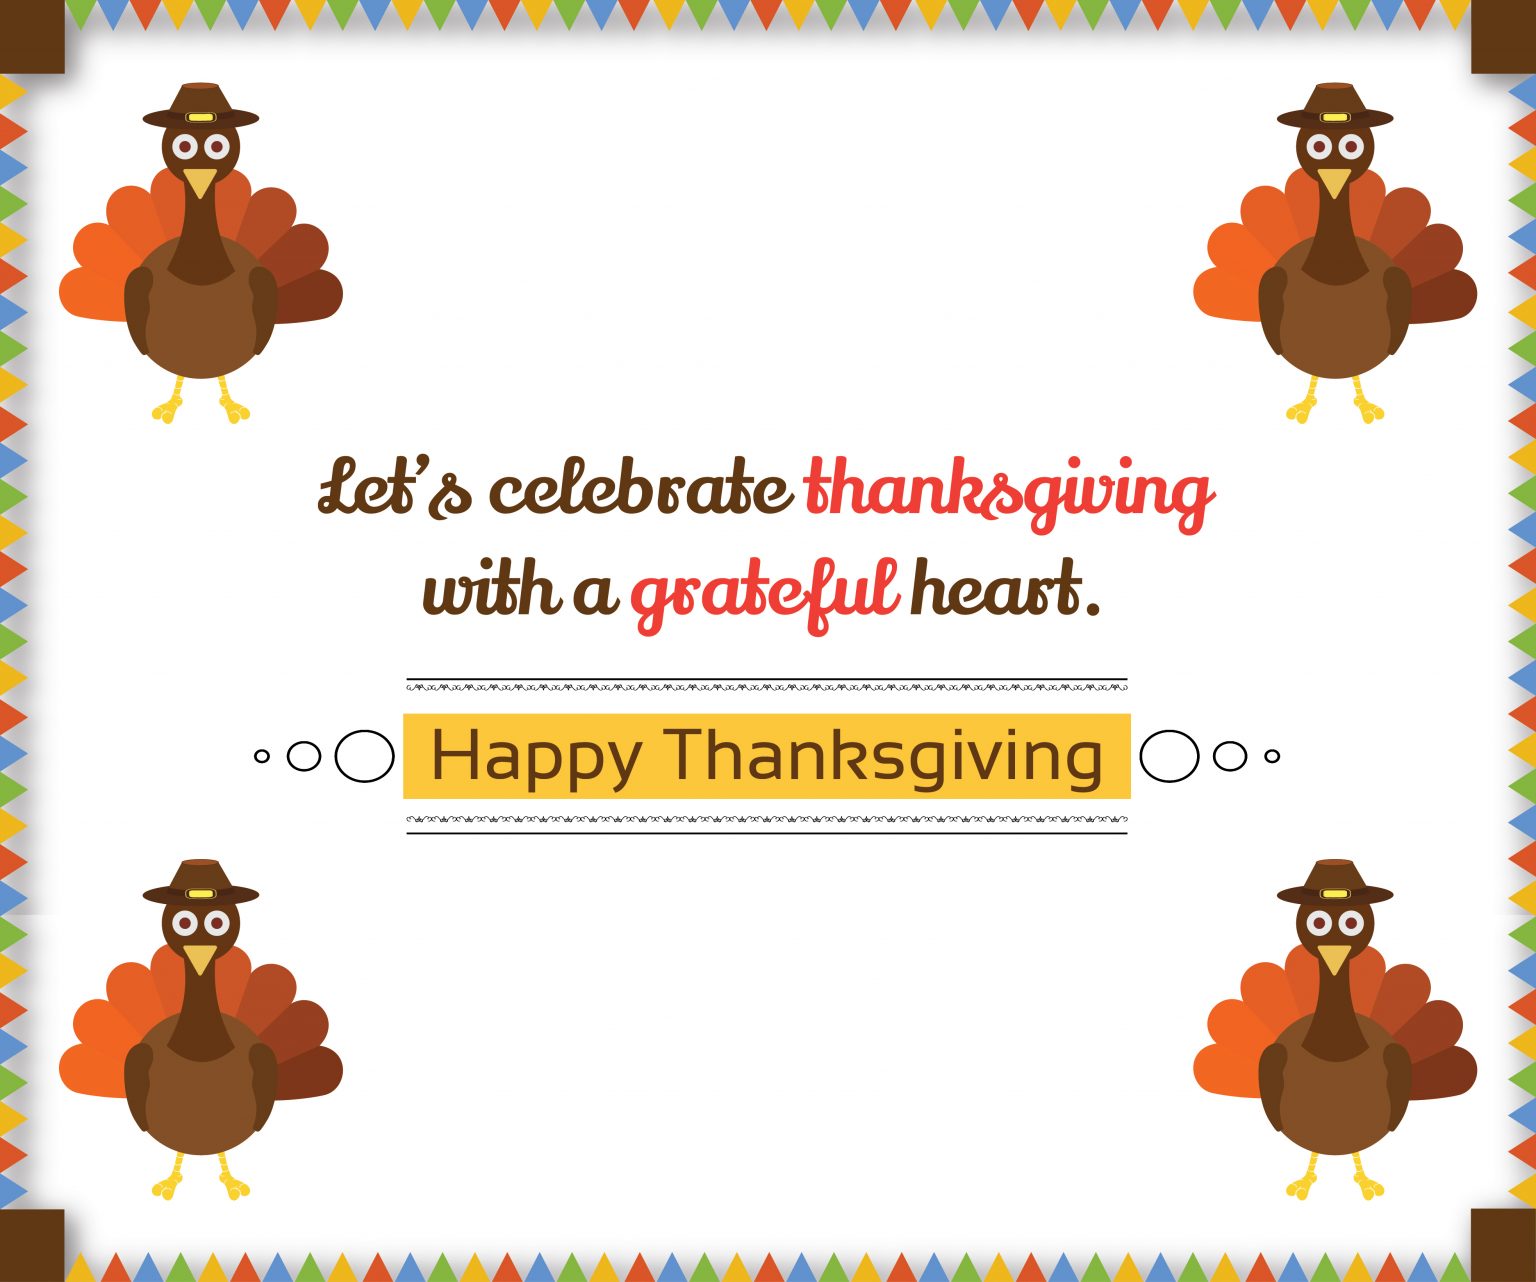 50+ Thanksgiving Wishes, Messages, Quotes and Images